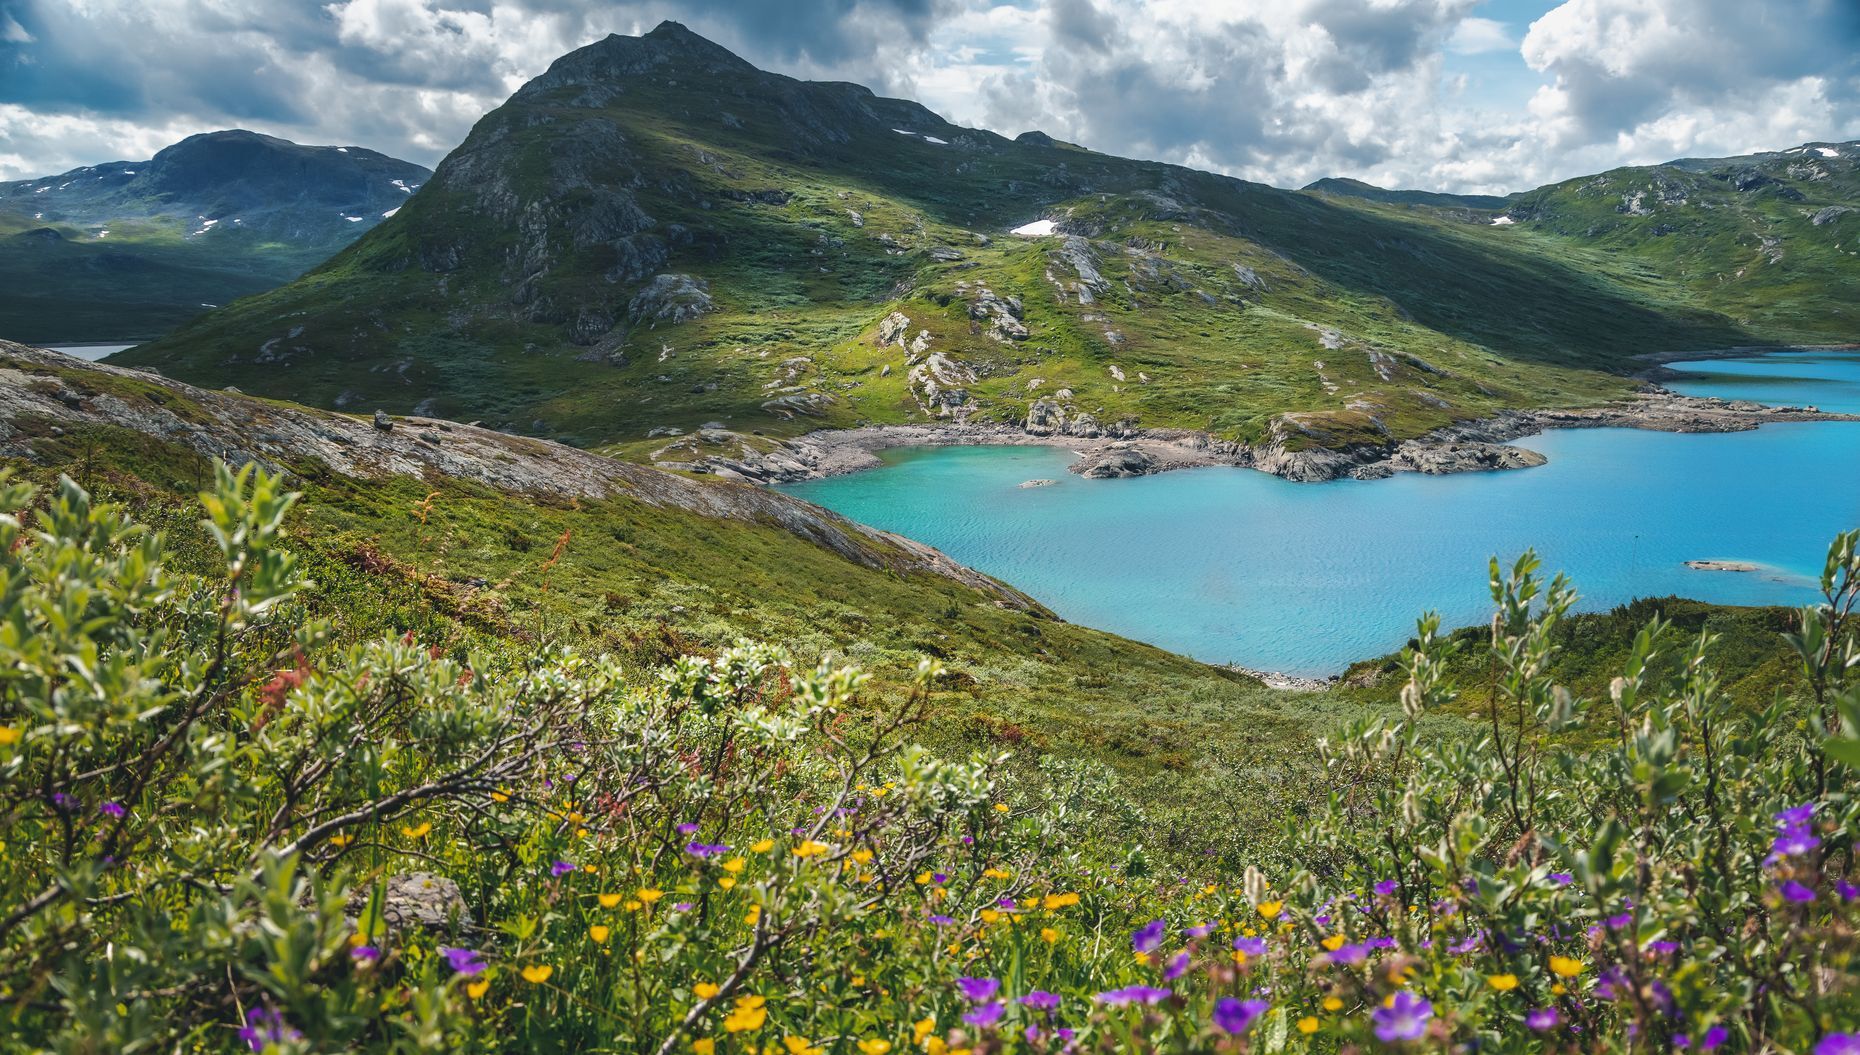 A true paradise for adventure enthusiasts, the <a href="https://www.visitnorway.com/places-to-go/eastern-norway/the-jotunheimen-mountains/plan-your-trip/?lang=usa" rel="noreferrer noopener">Jotunheimen National Park</a> is home to Norway’s tallest mountain, Galdhøpiggen. Hikers will enjoy a memorable trek through exceptional alpine scenery, while the region’s famous wild reindeer population will add an extra touch of magic to the experience. Visitors can also make the most of this Norwegian jewel with a guided climb up Galdhøpiggen. Other sporting activities include mountaineering, fishing, kayaking, and hiking.